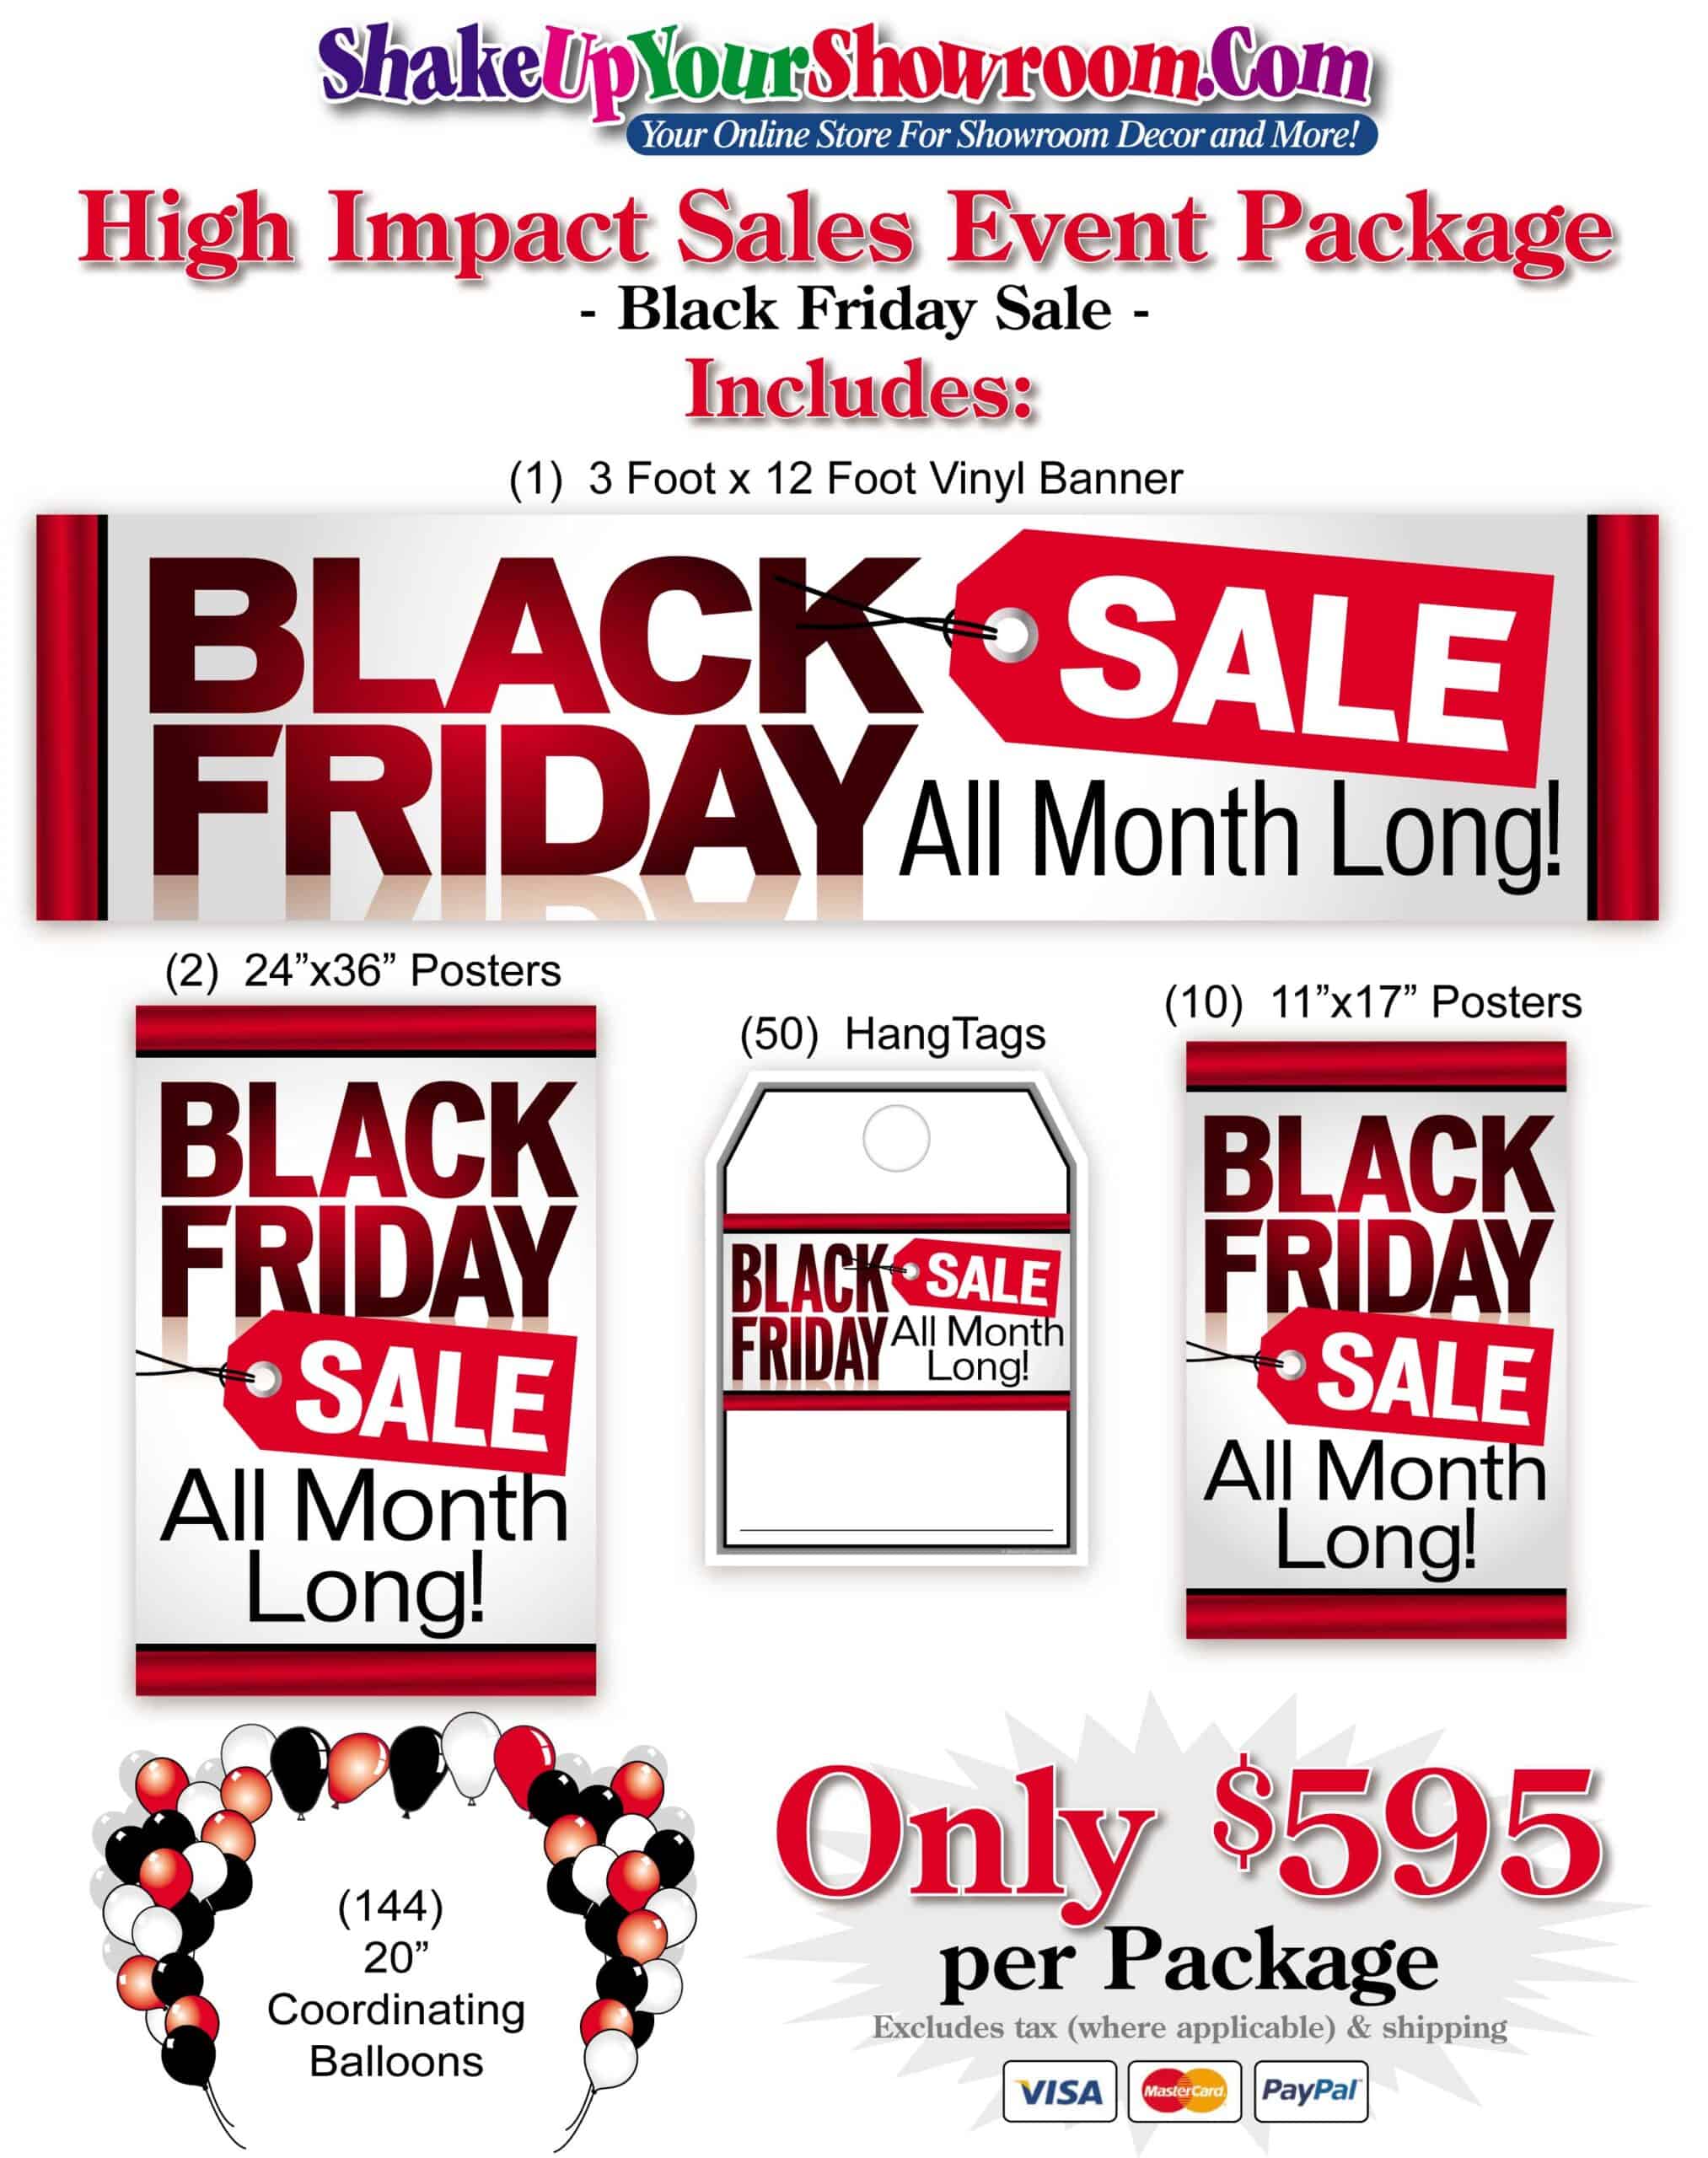 Hinvhai Black of Friday Sales Today Clearance Prime Prime Sales